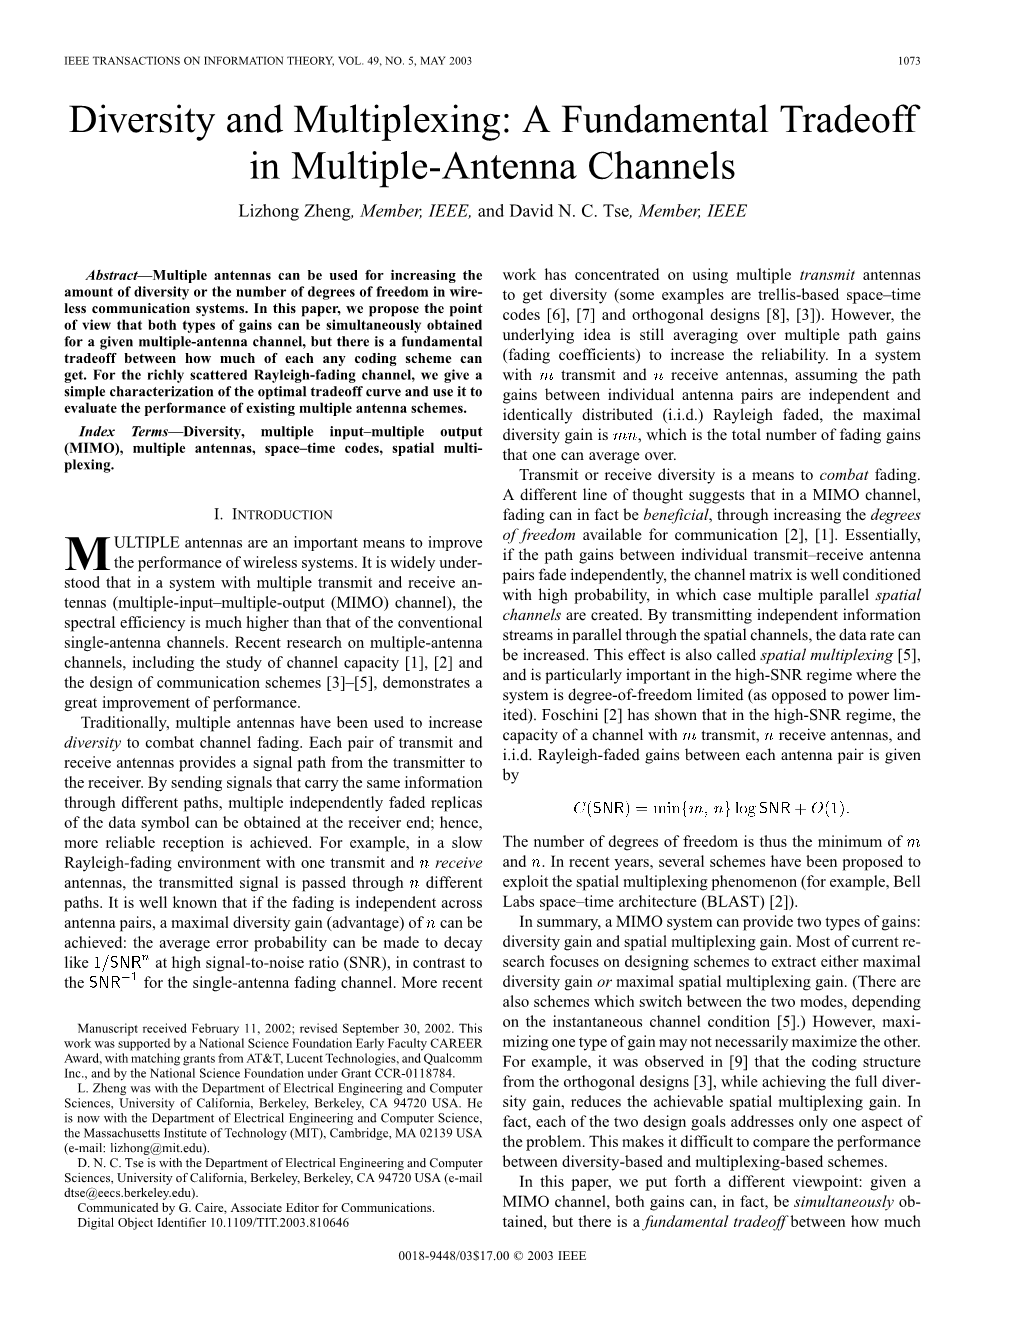 Diversity and Multiplexing: a Fundamental Tradeoff in Multiple-Antenna Channels Lizhong Zheng, Member, IEEE, and David N